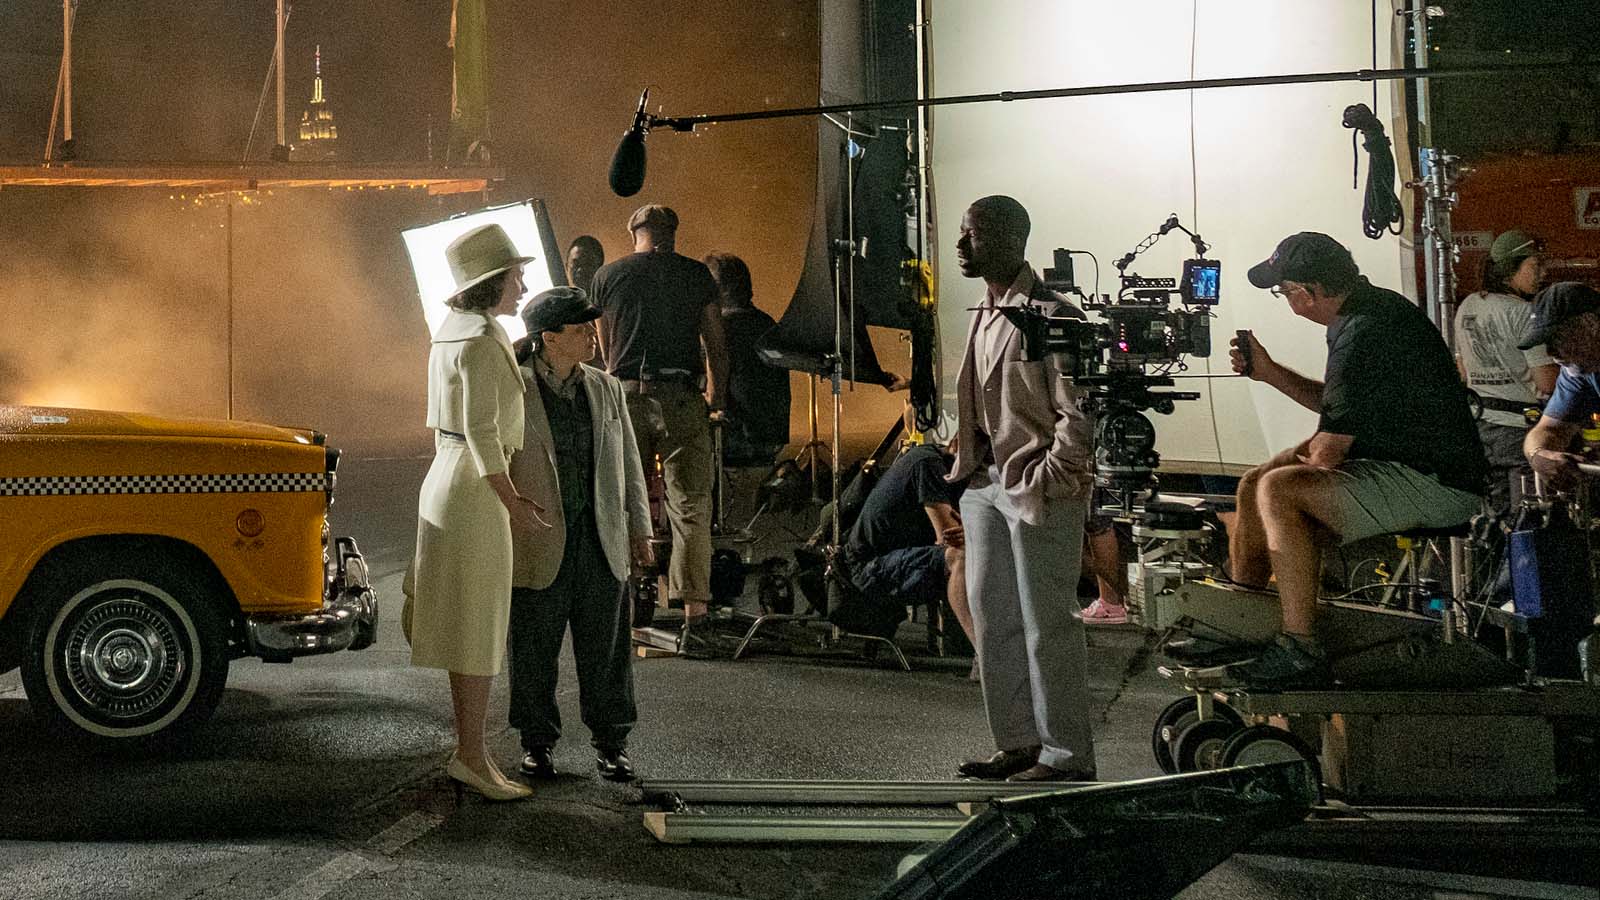 Sterling K. Brown (Reggie) takes up position close to the camera to preserve a tight eyeline. Image © Amazon Studios